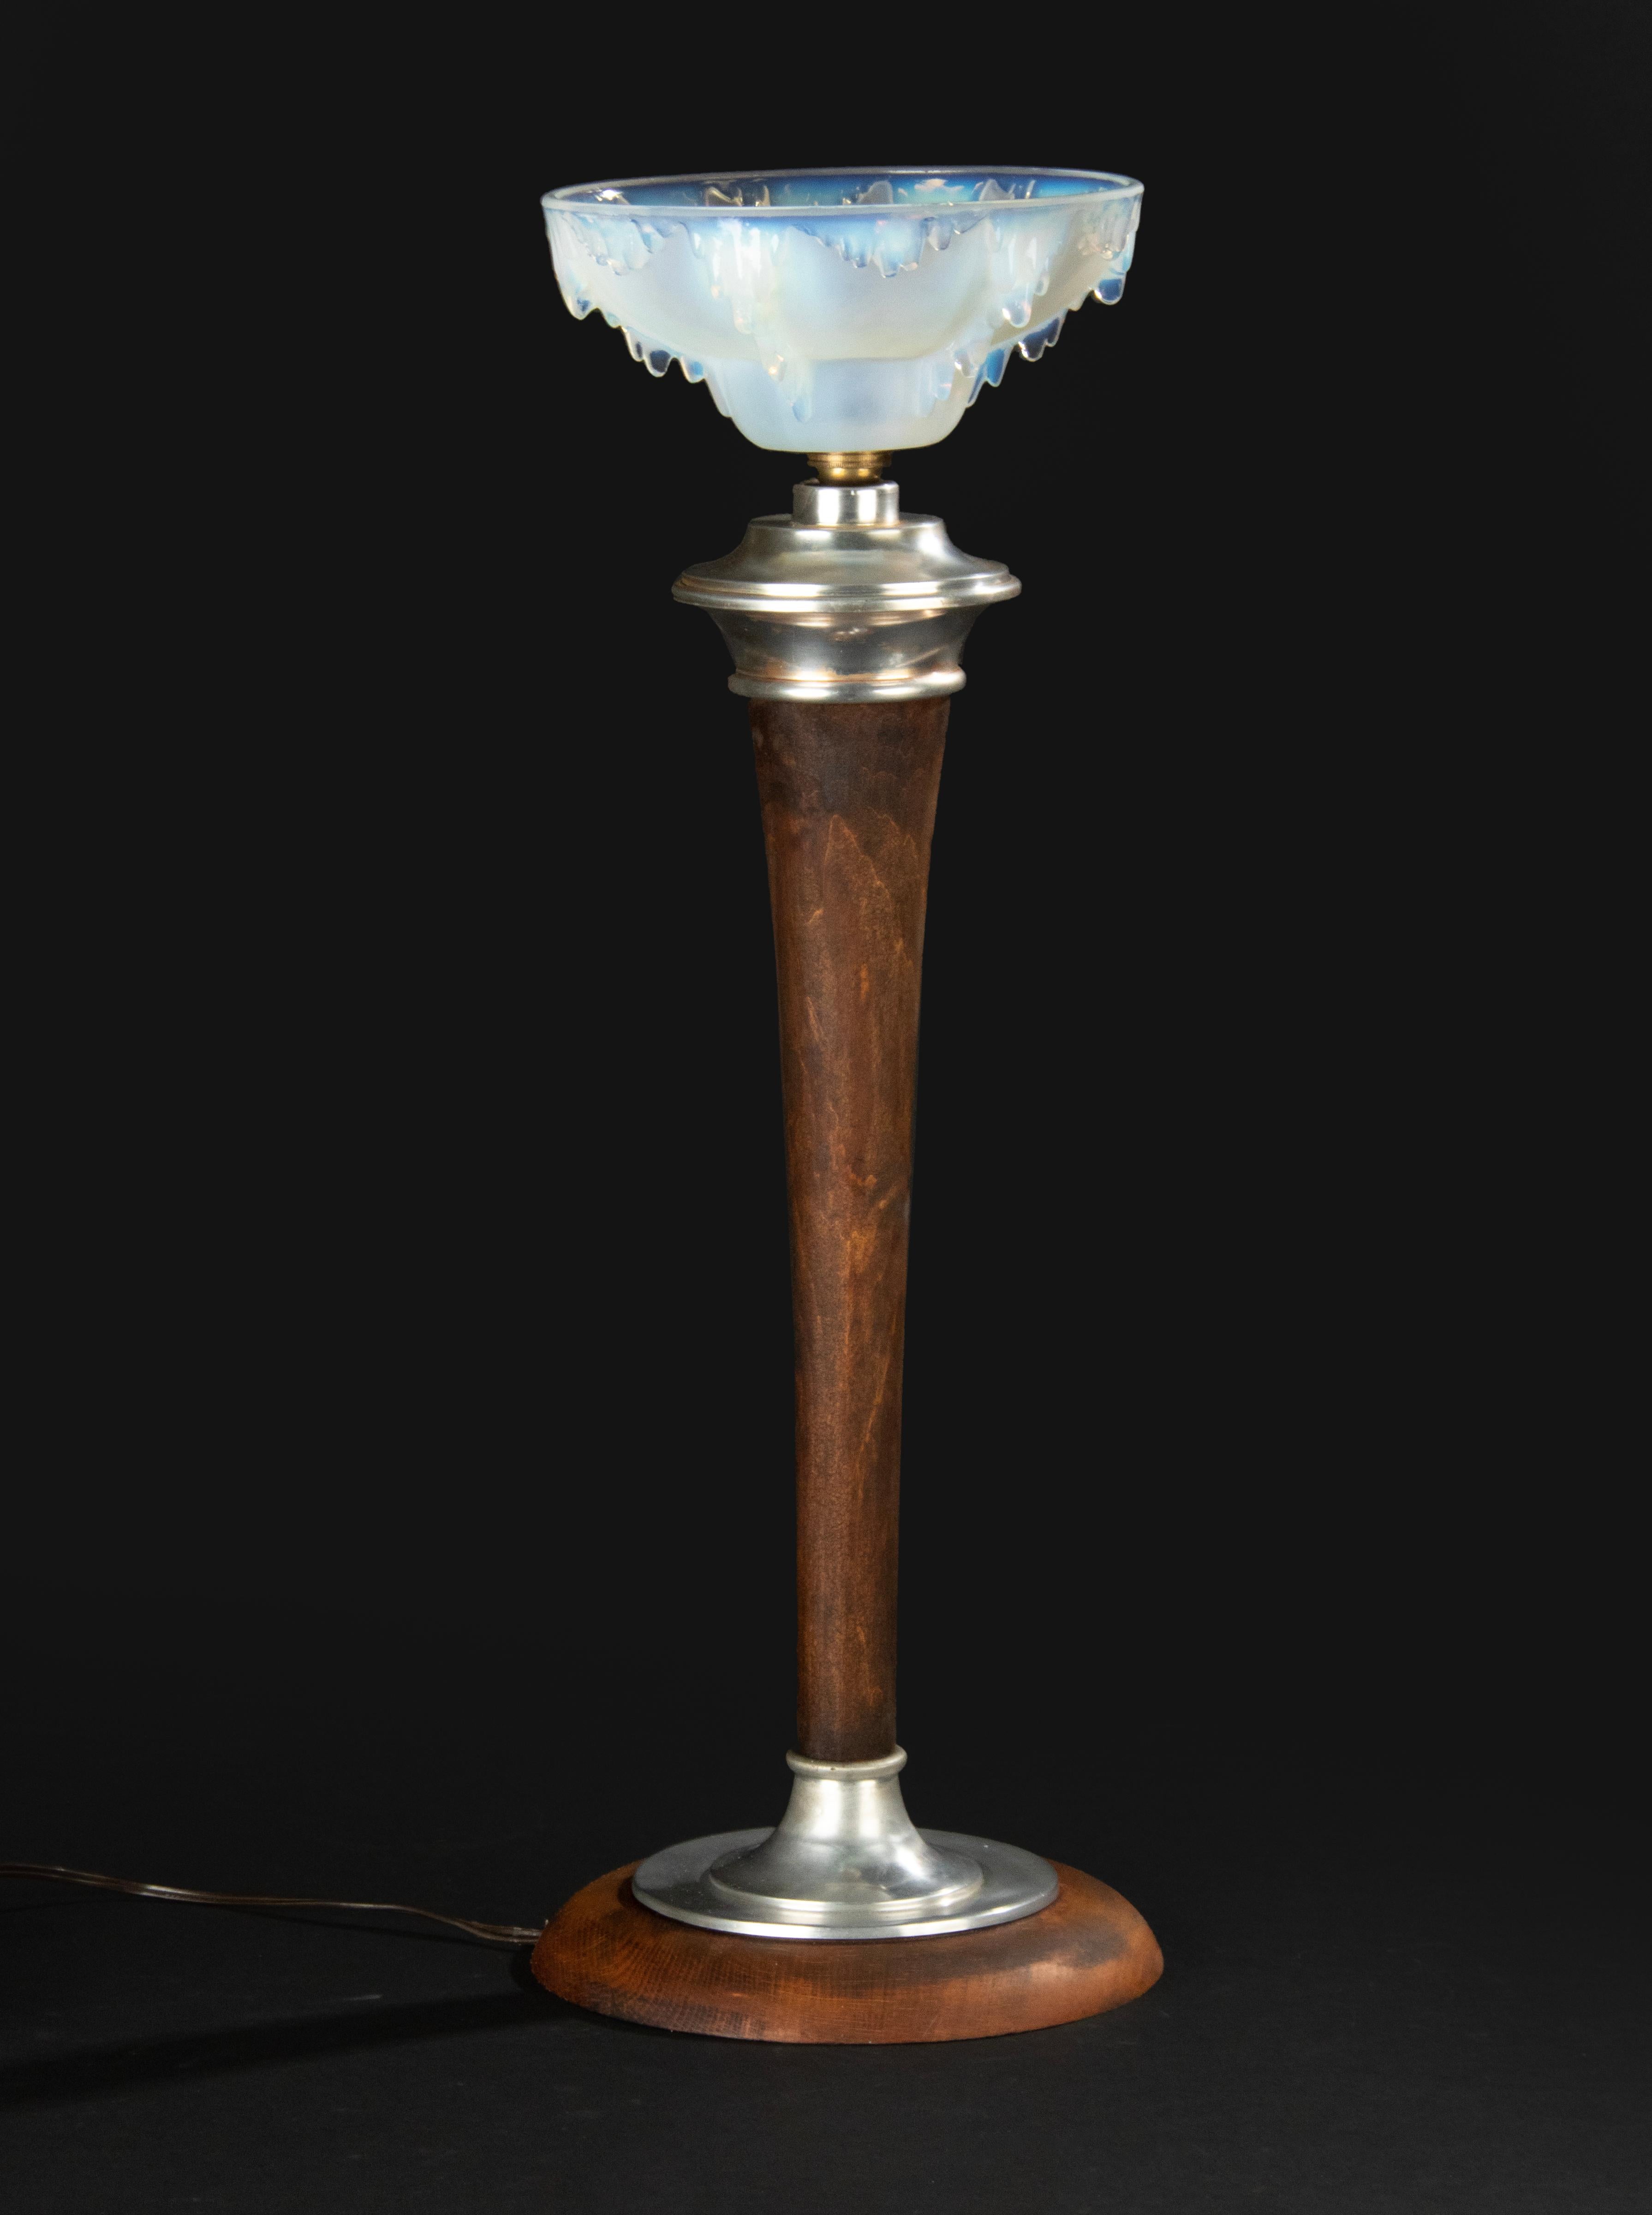 A large Art Deco table lamp made of beechwood and nickel plated metal. On top a blue opalescent glass molded glass lampshade in the style of Ezan. It has no signature. Bayonet lamp socket. The lamp is in working order. Glasswork is in good